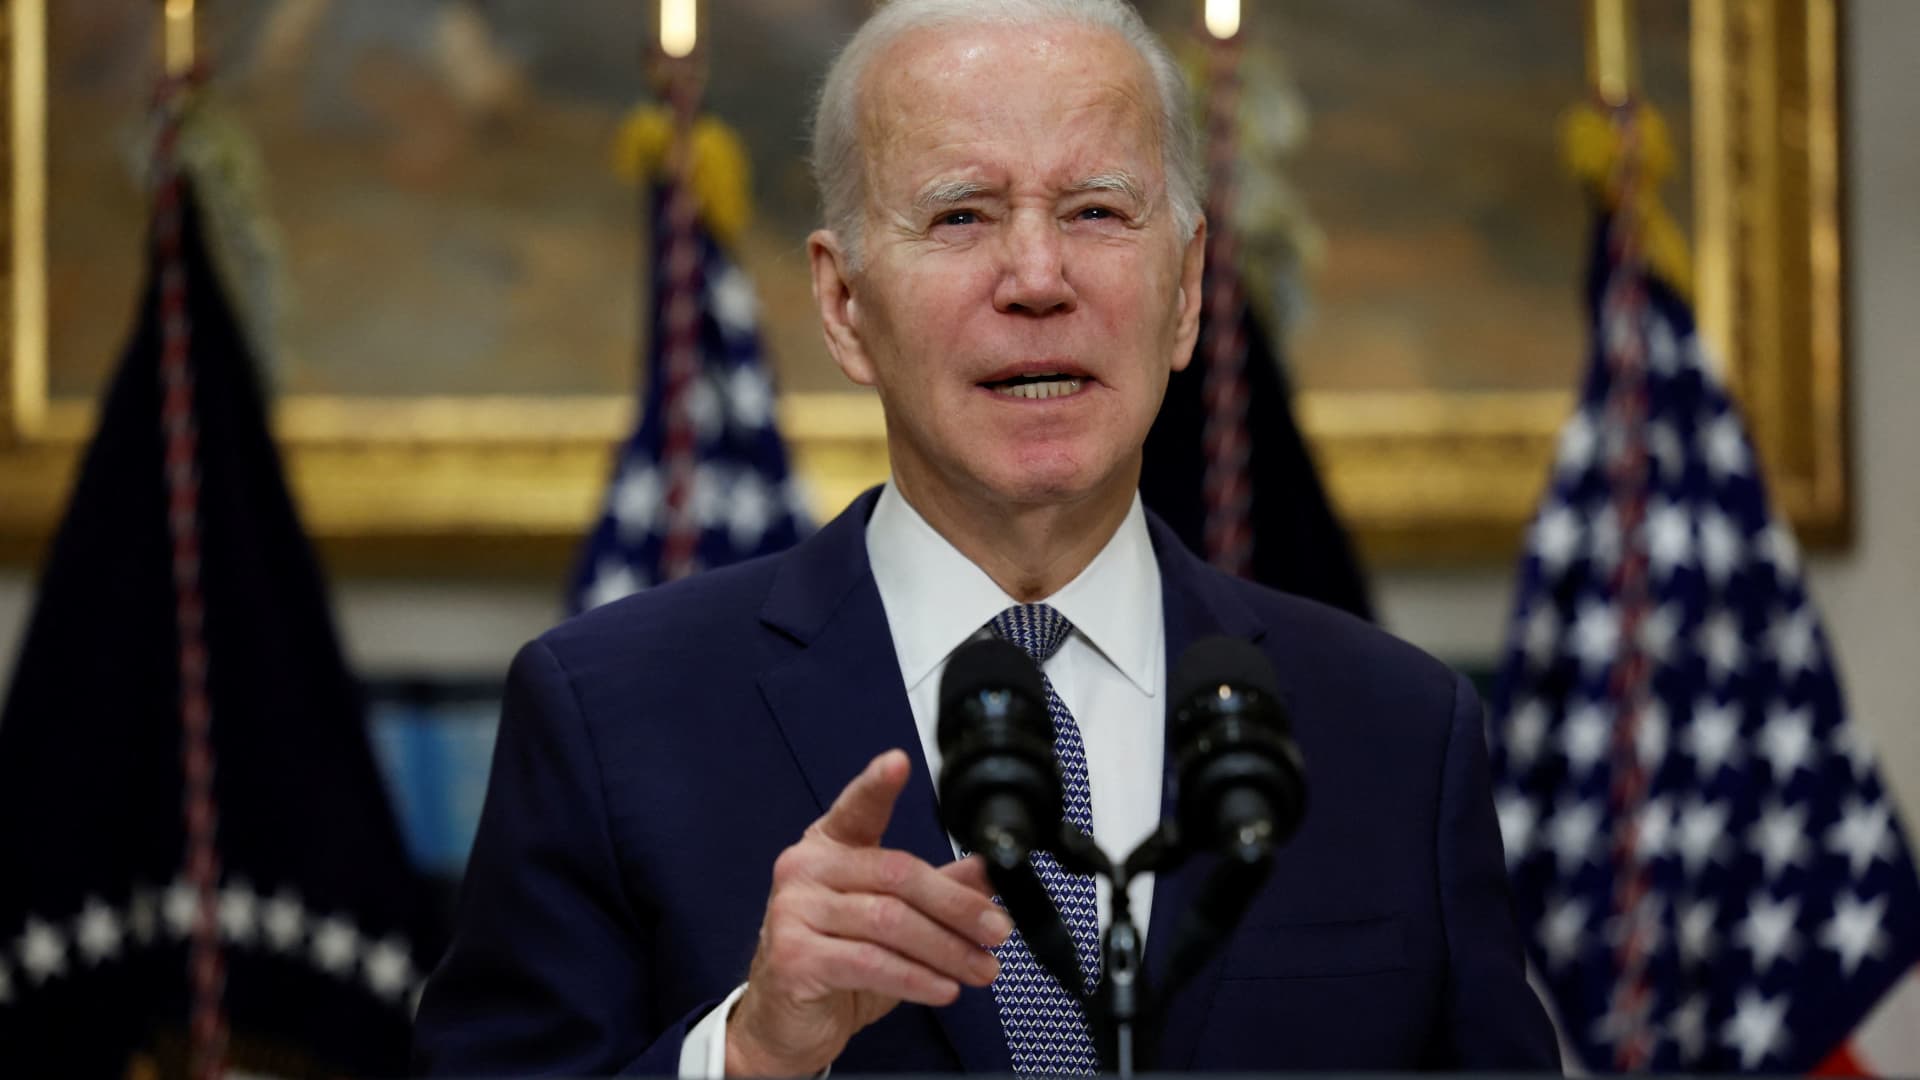 'That's how capitalism works,' Biden says of SVB, Signature Bank investors who lost money in failed banks